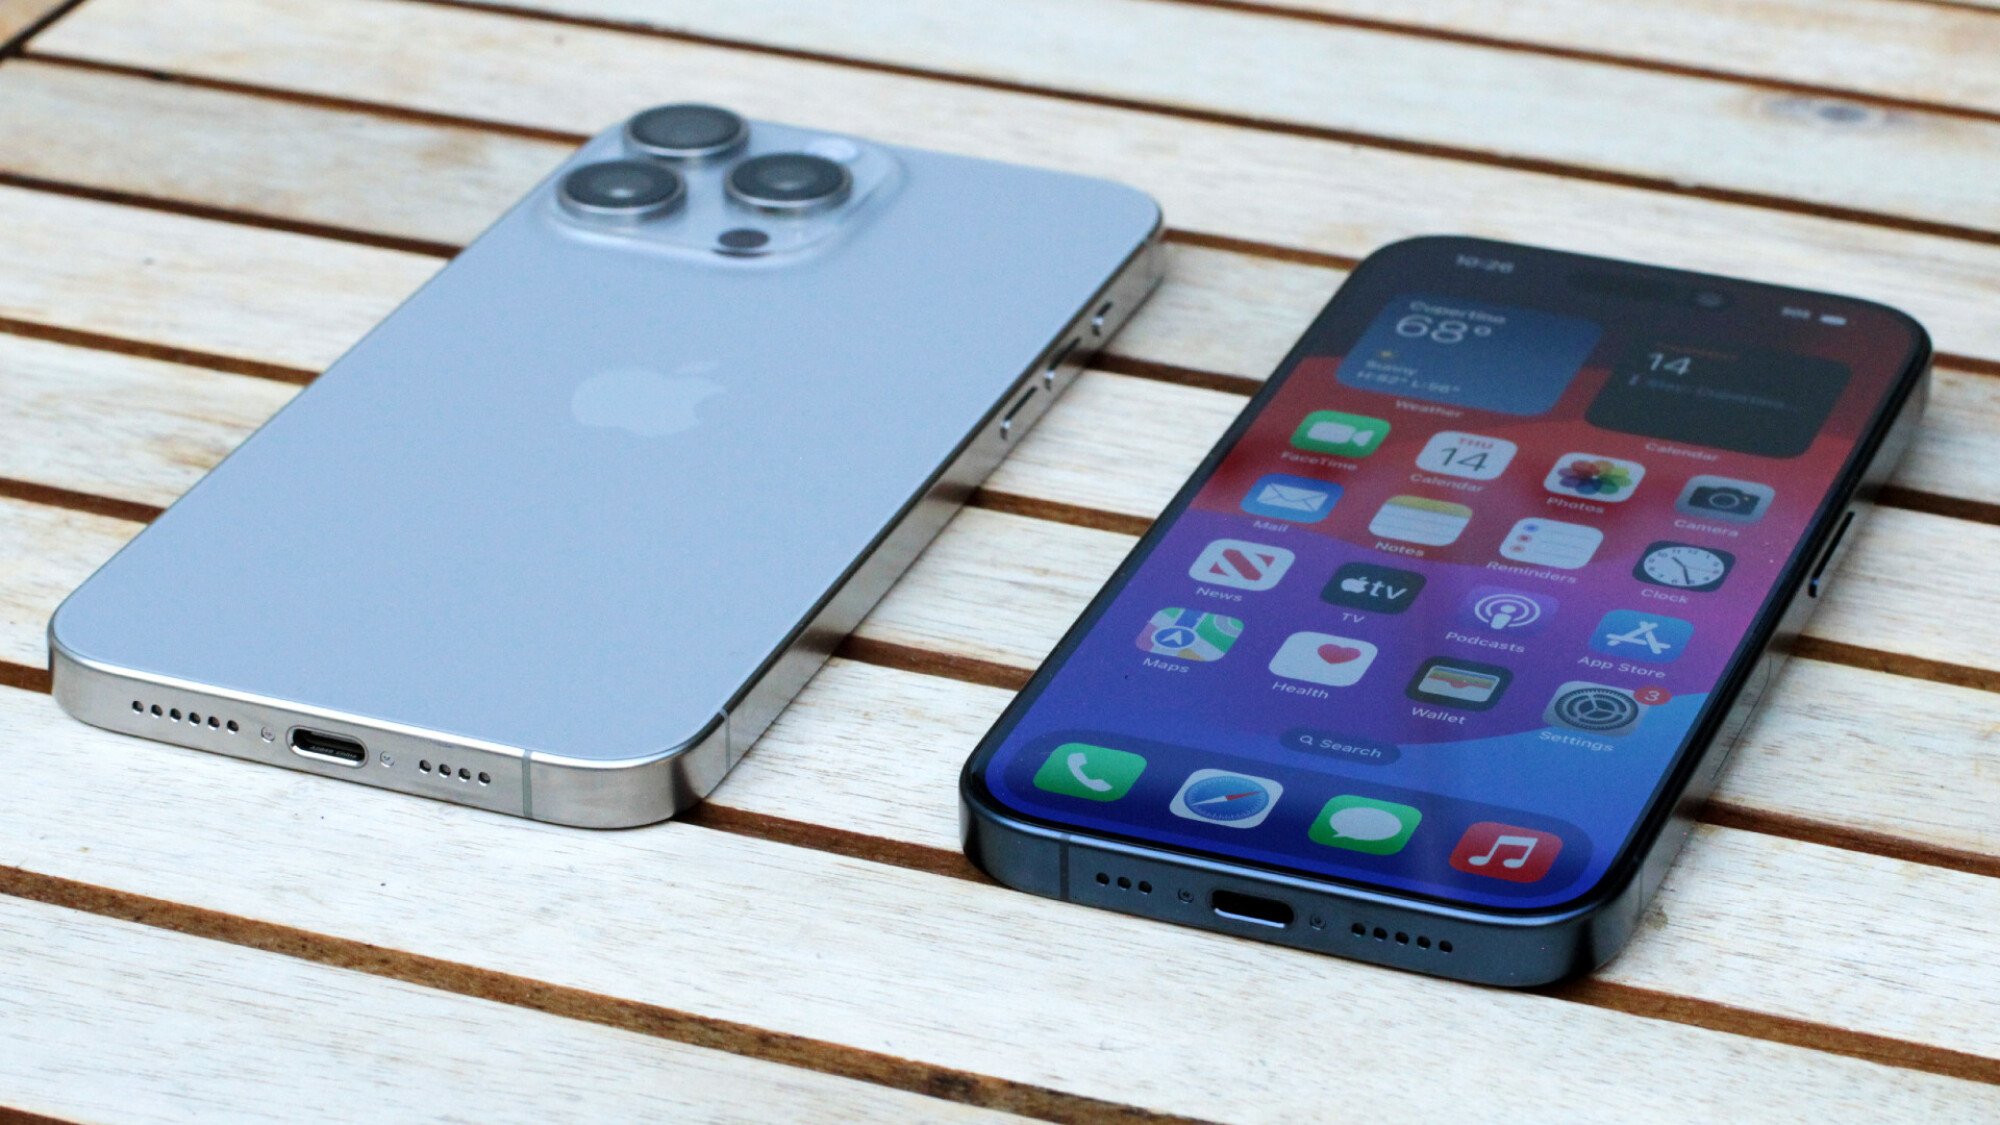 Apple iPhone 15 Pro and Pro Max